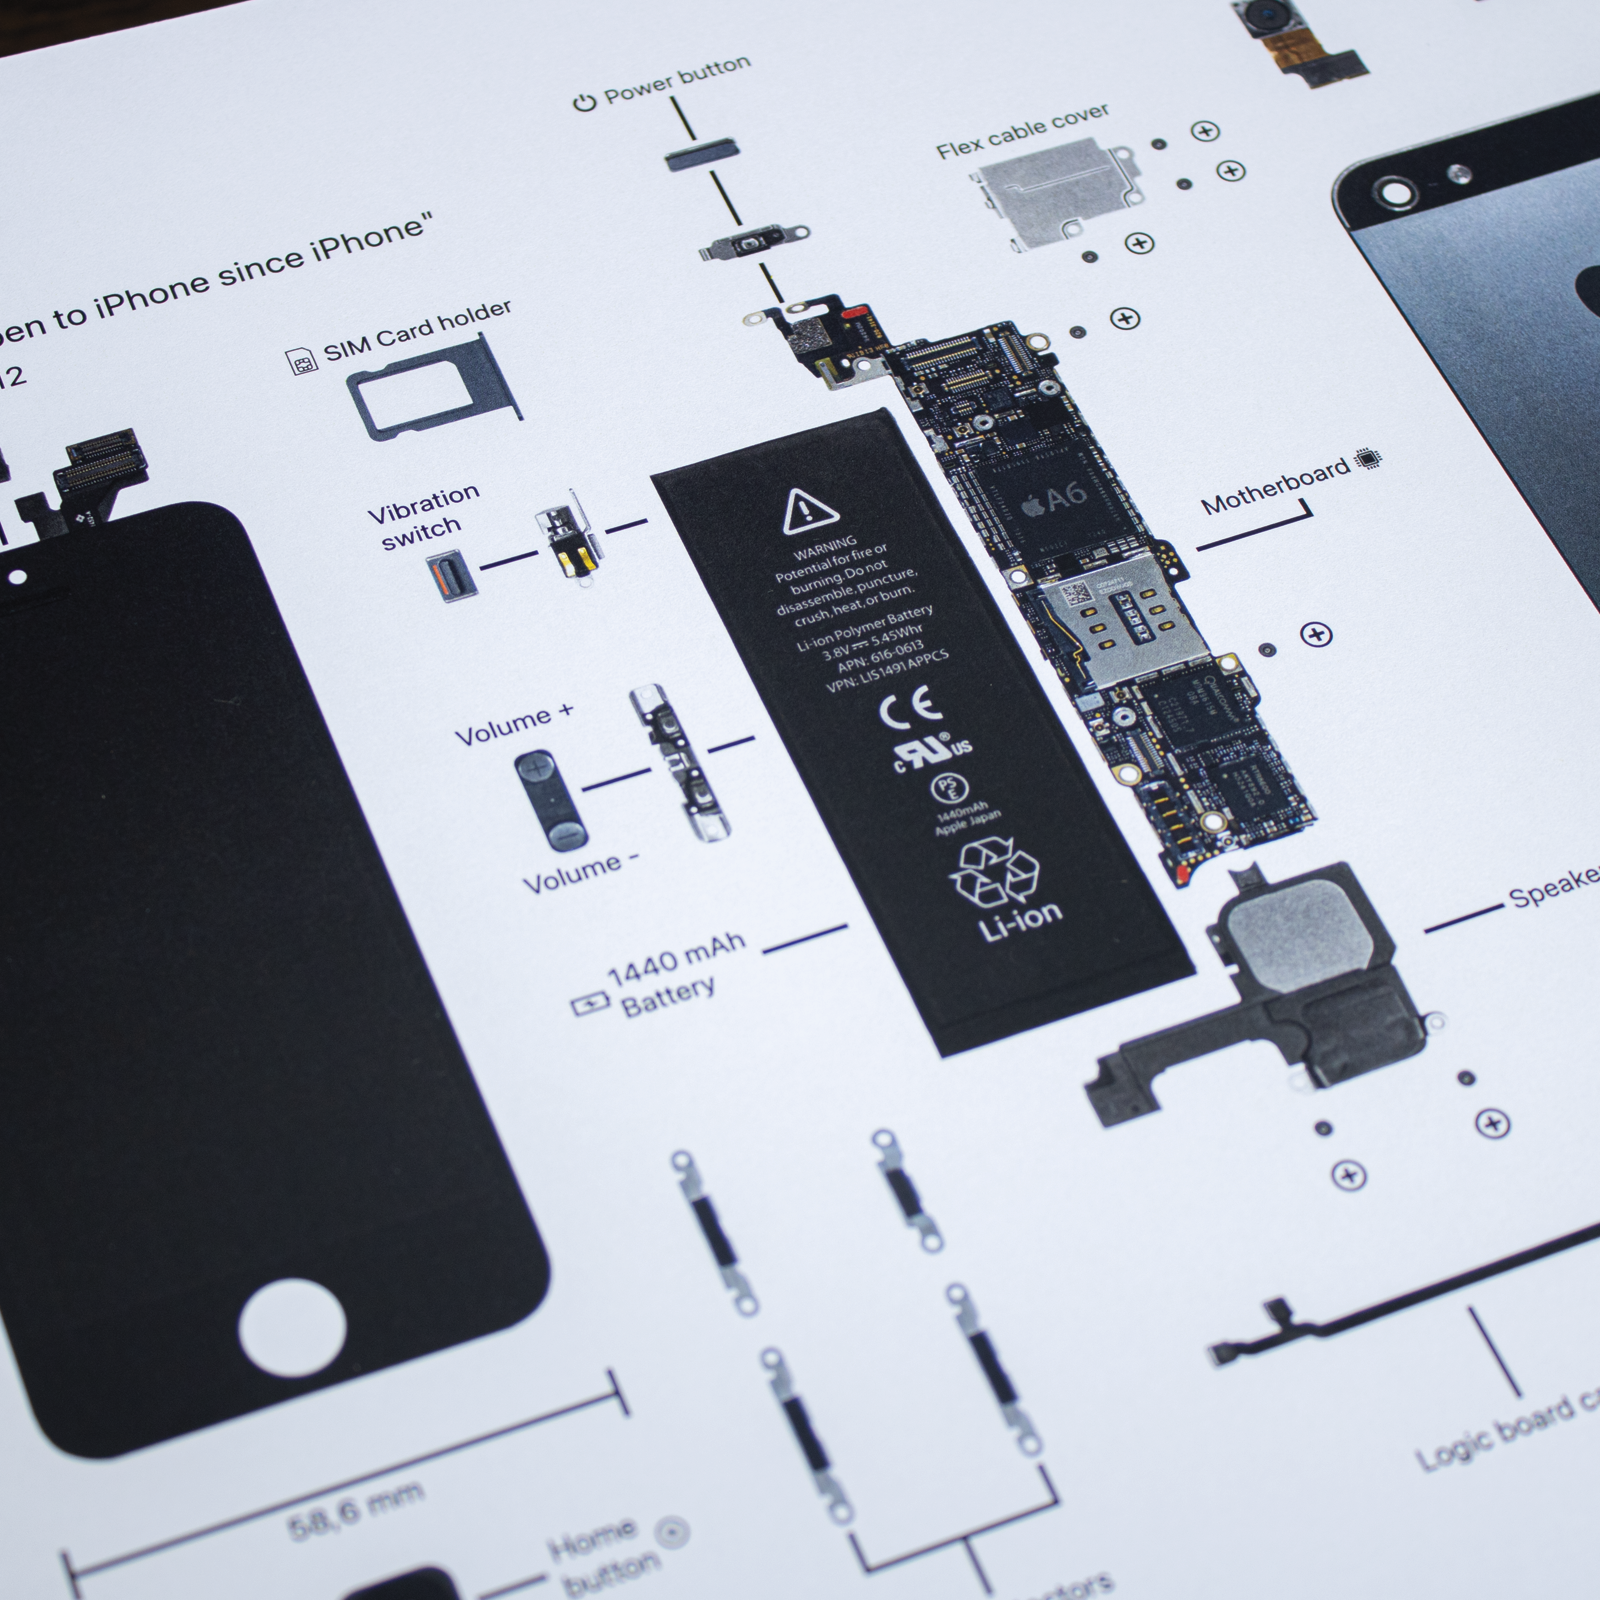 Picture frame of the iPhone 5 parts